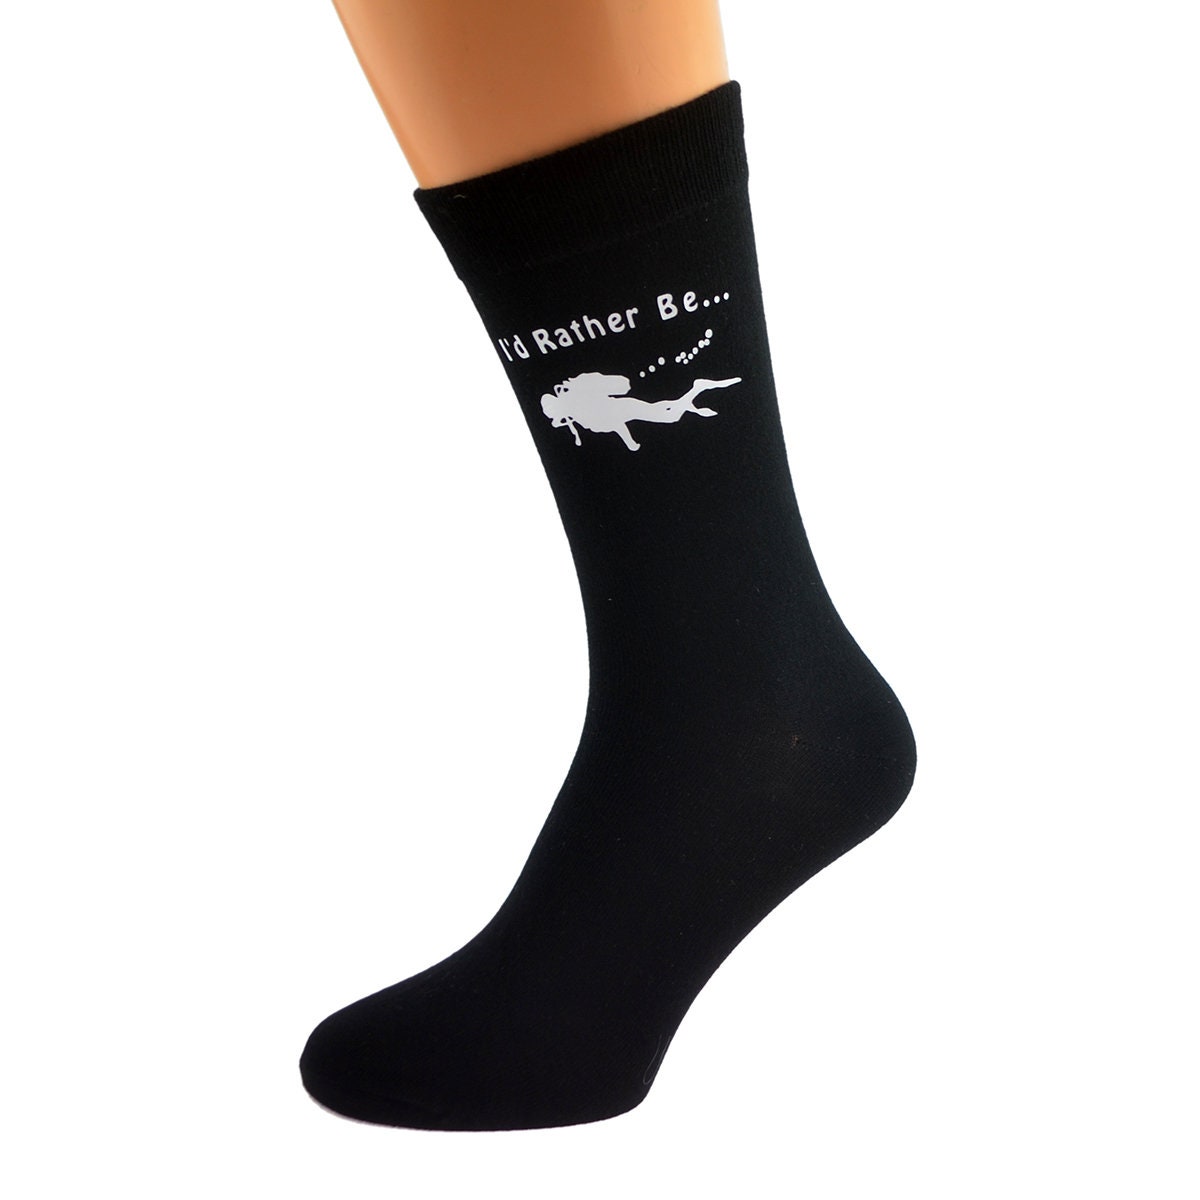 I’d Rather Be Diving With Scuba Diver Image Printed in White Vinyl On Mens Black Cotton Rich Socks Great. One Size, UK 8-12